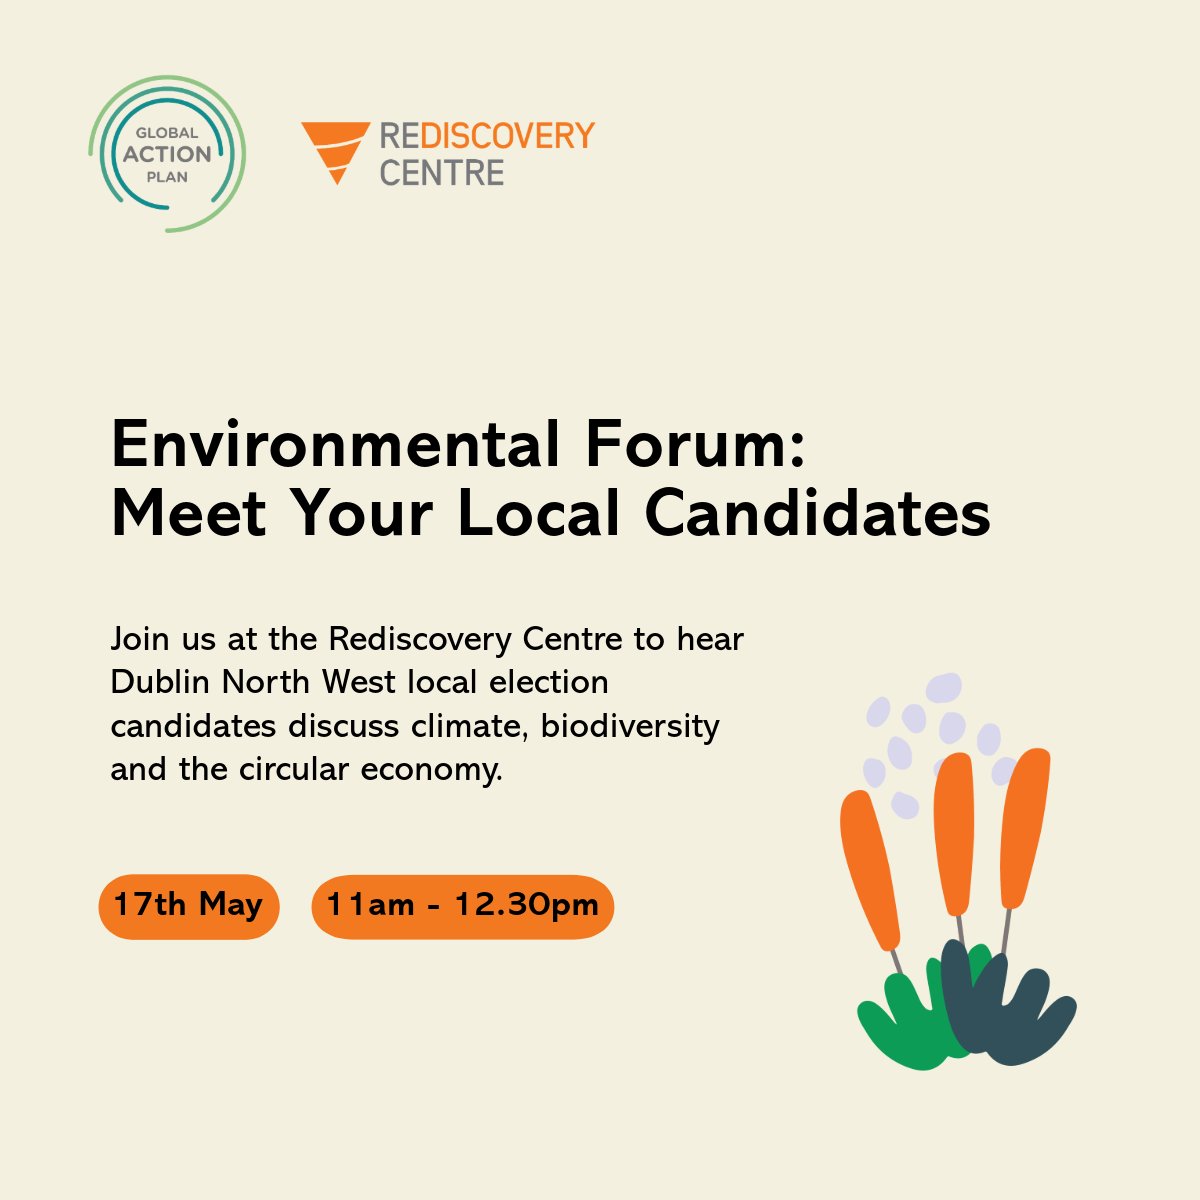 Join us this Friday to hear Dublin NW #localelection candidates discuss the environment, #climatechange, #biodiversity + the #circulareconomy.

Moderated by Kevin O'Sullivan, Environment and Science Editor + former editor of @IrishTimes: ow.ly/UOFg50Rziqg

@gapireland